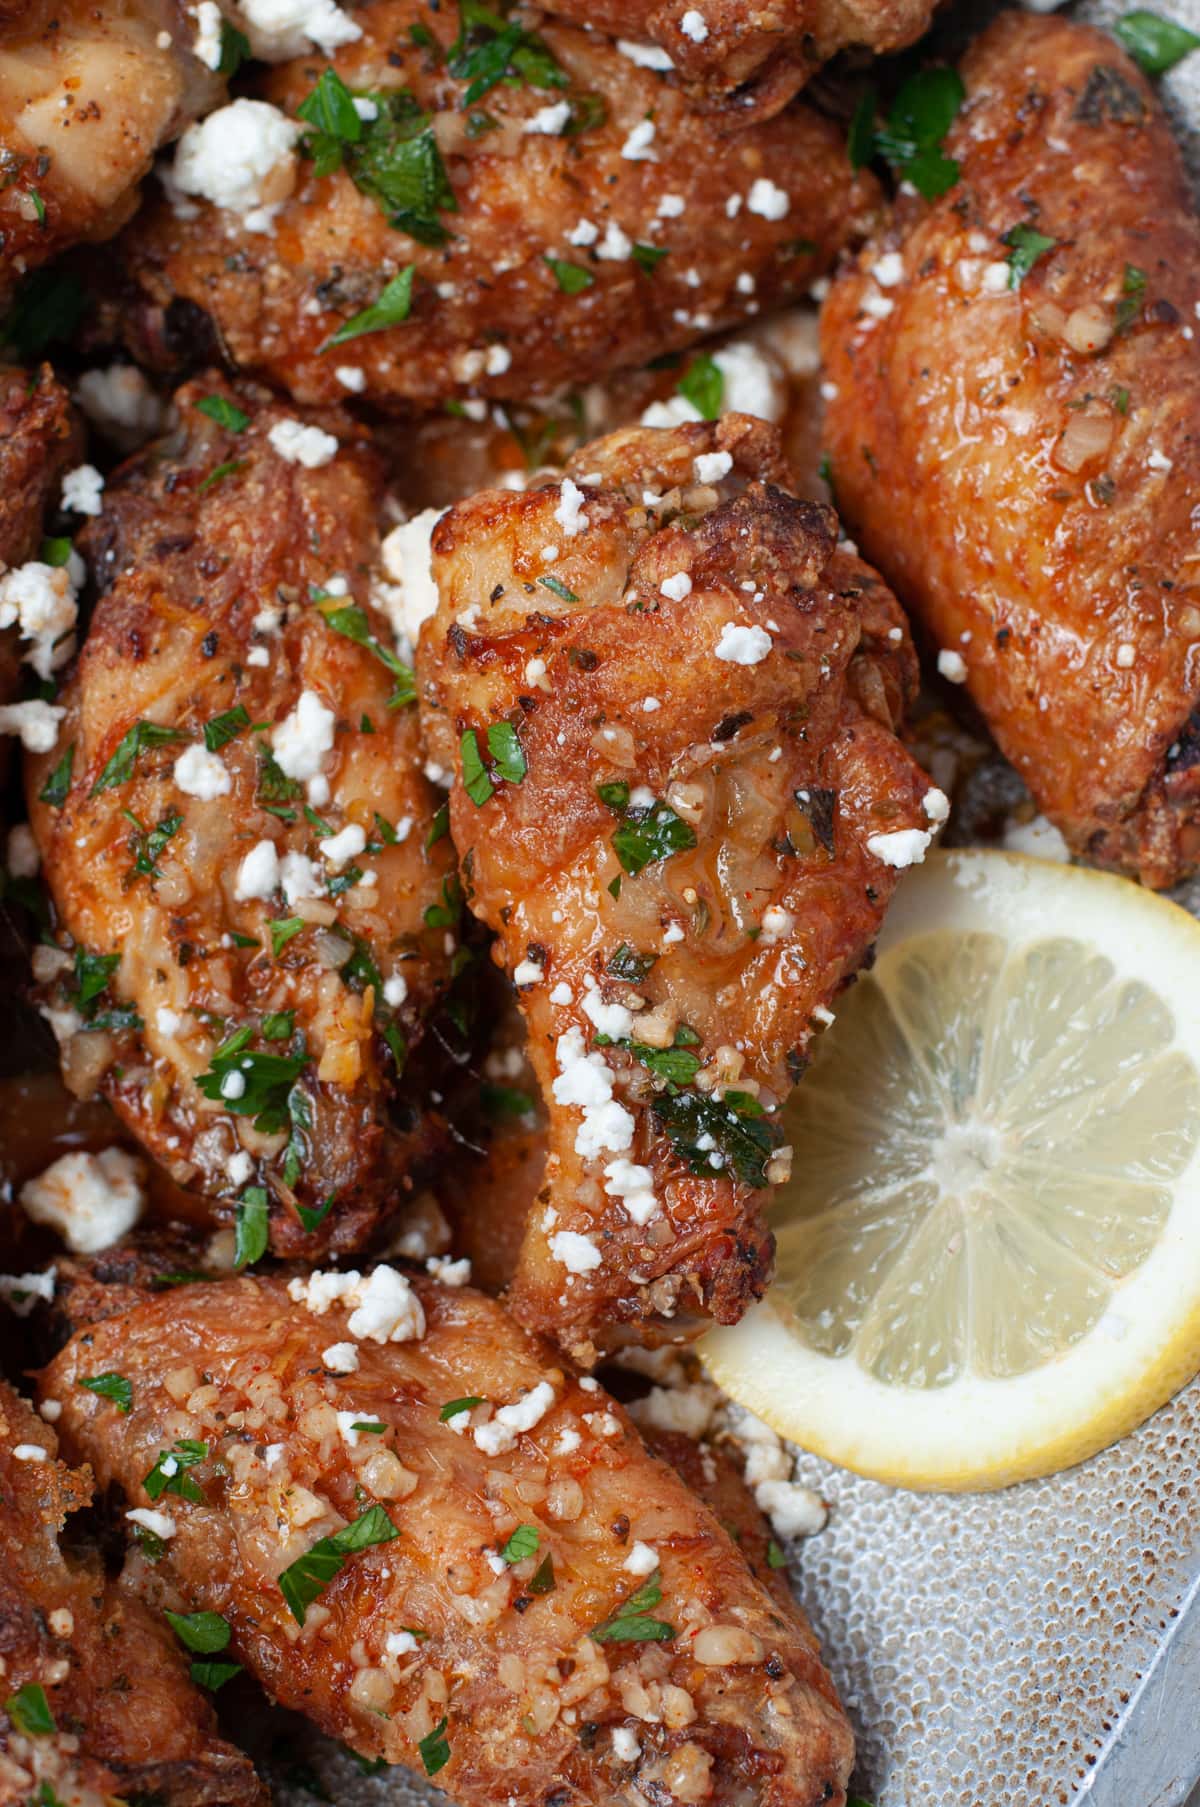 Metal serving dish with crispy chicken wings, topped with feta cheese and parsley, and garnished with lemon